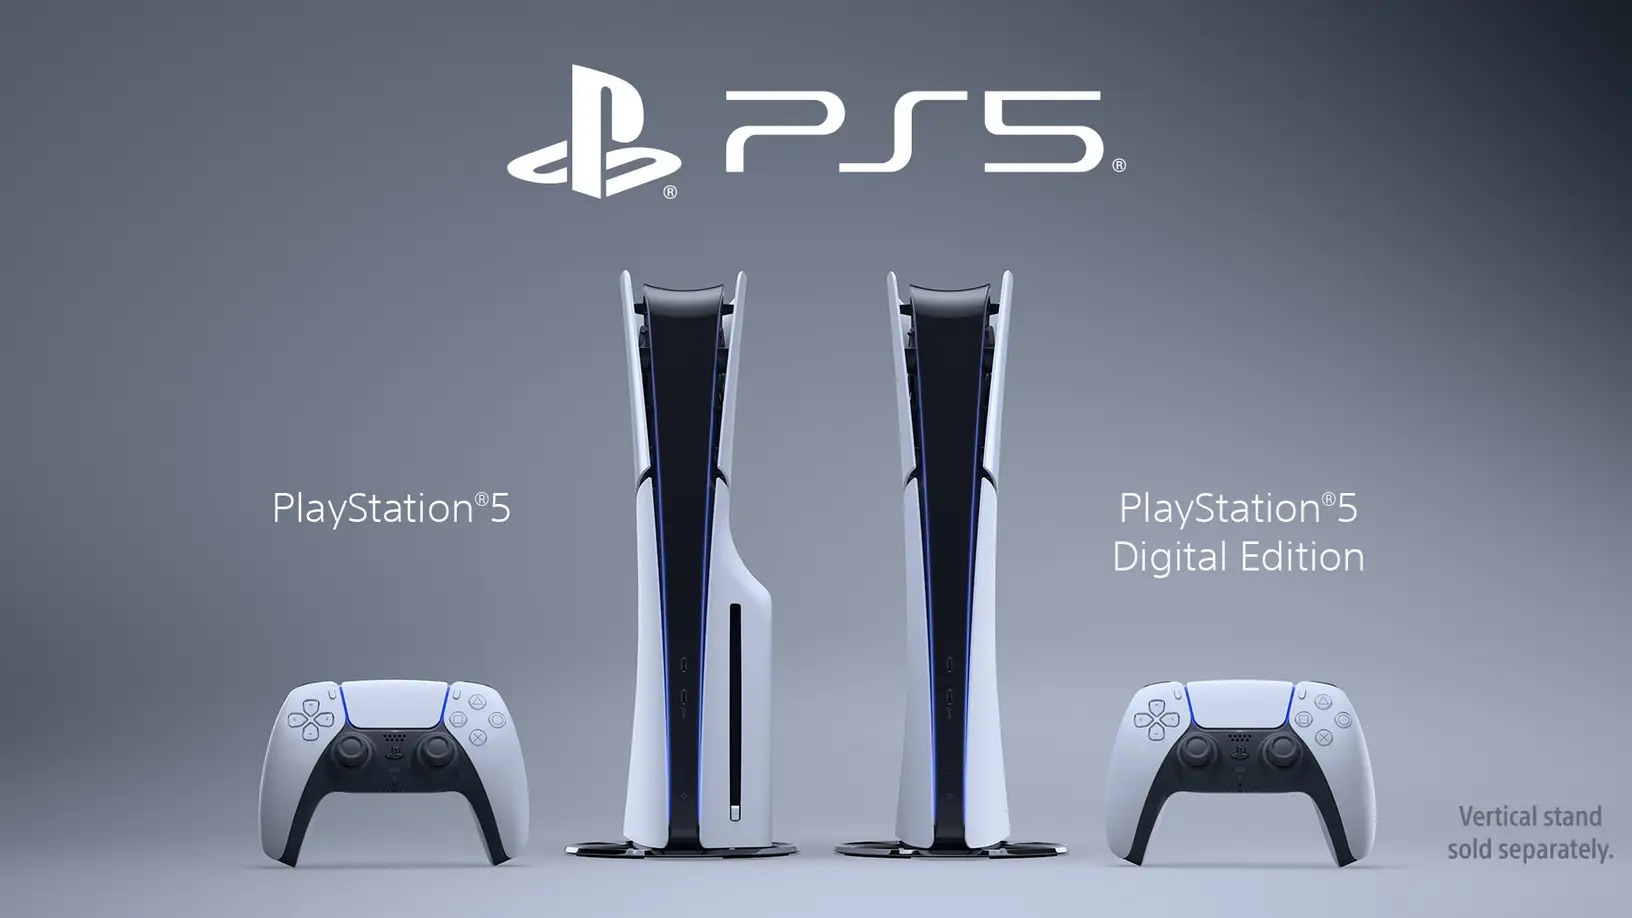 New PlayStation 5 consoles are here!